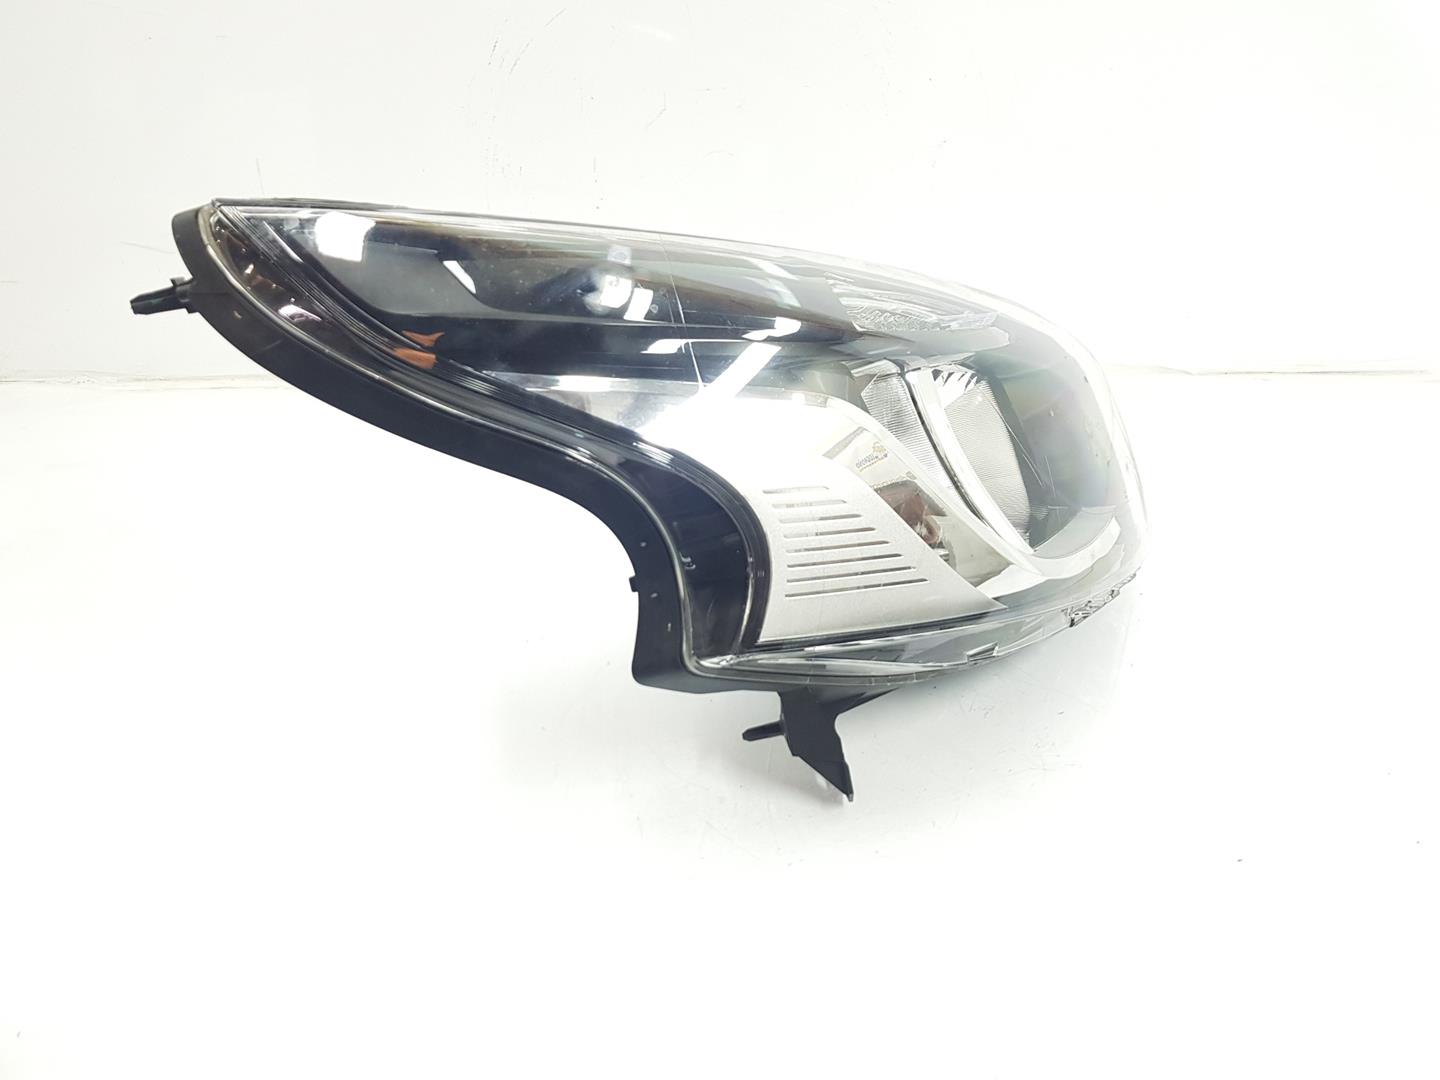 RENAULT Trafic 2 generation (2001-2015) Front Right Headlight 260109424R, 1EE011410-22, 2222DL 19890716